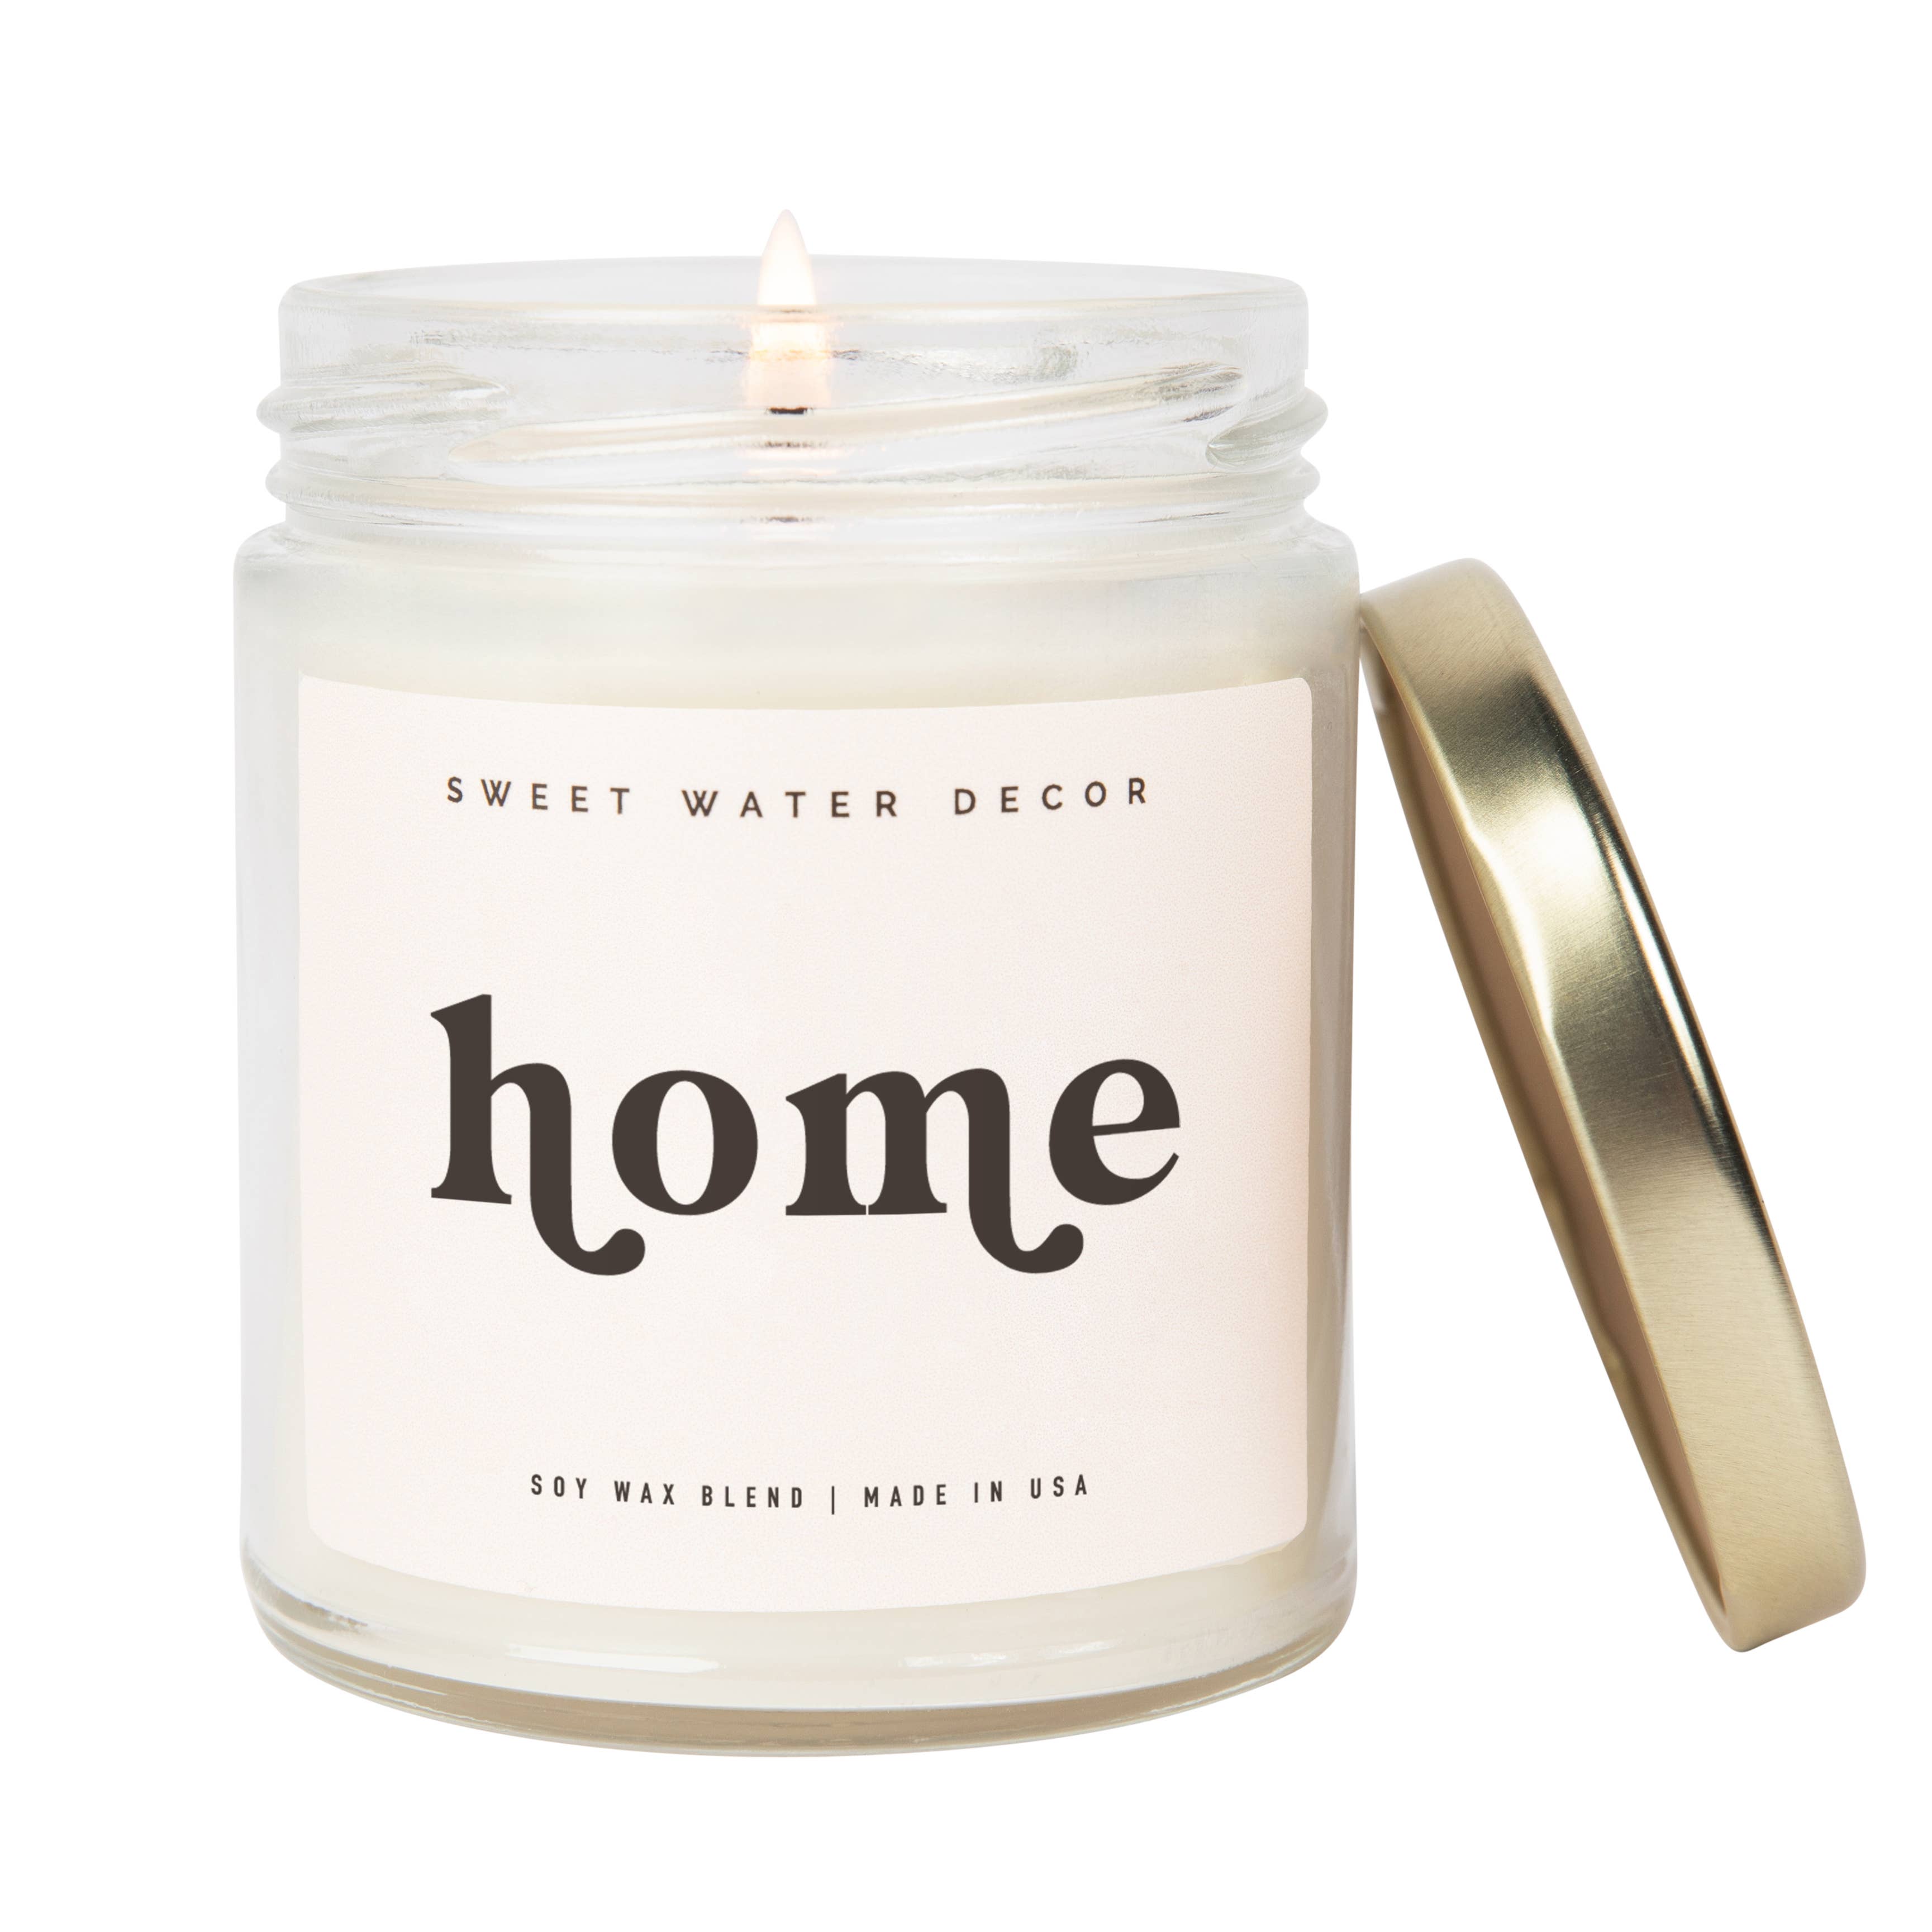 Home 9 oz Soy Candle - Home Decor & Gifts